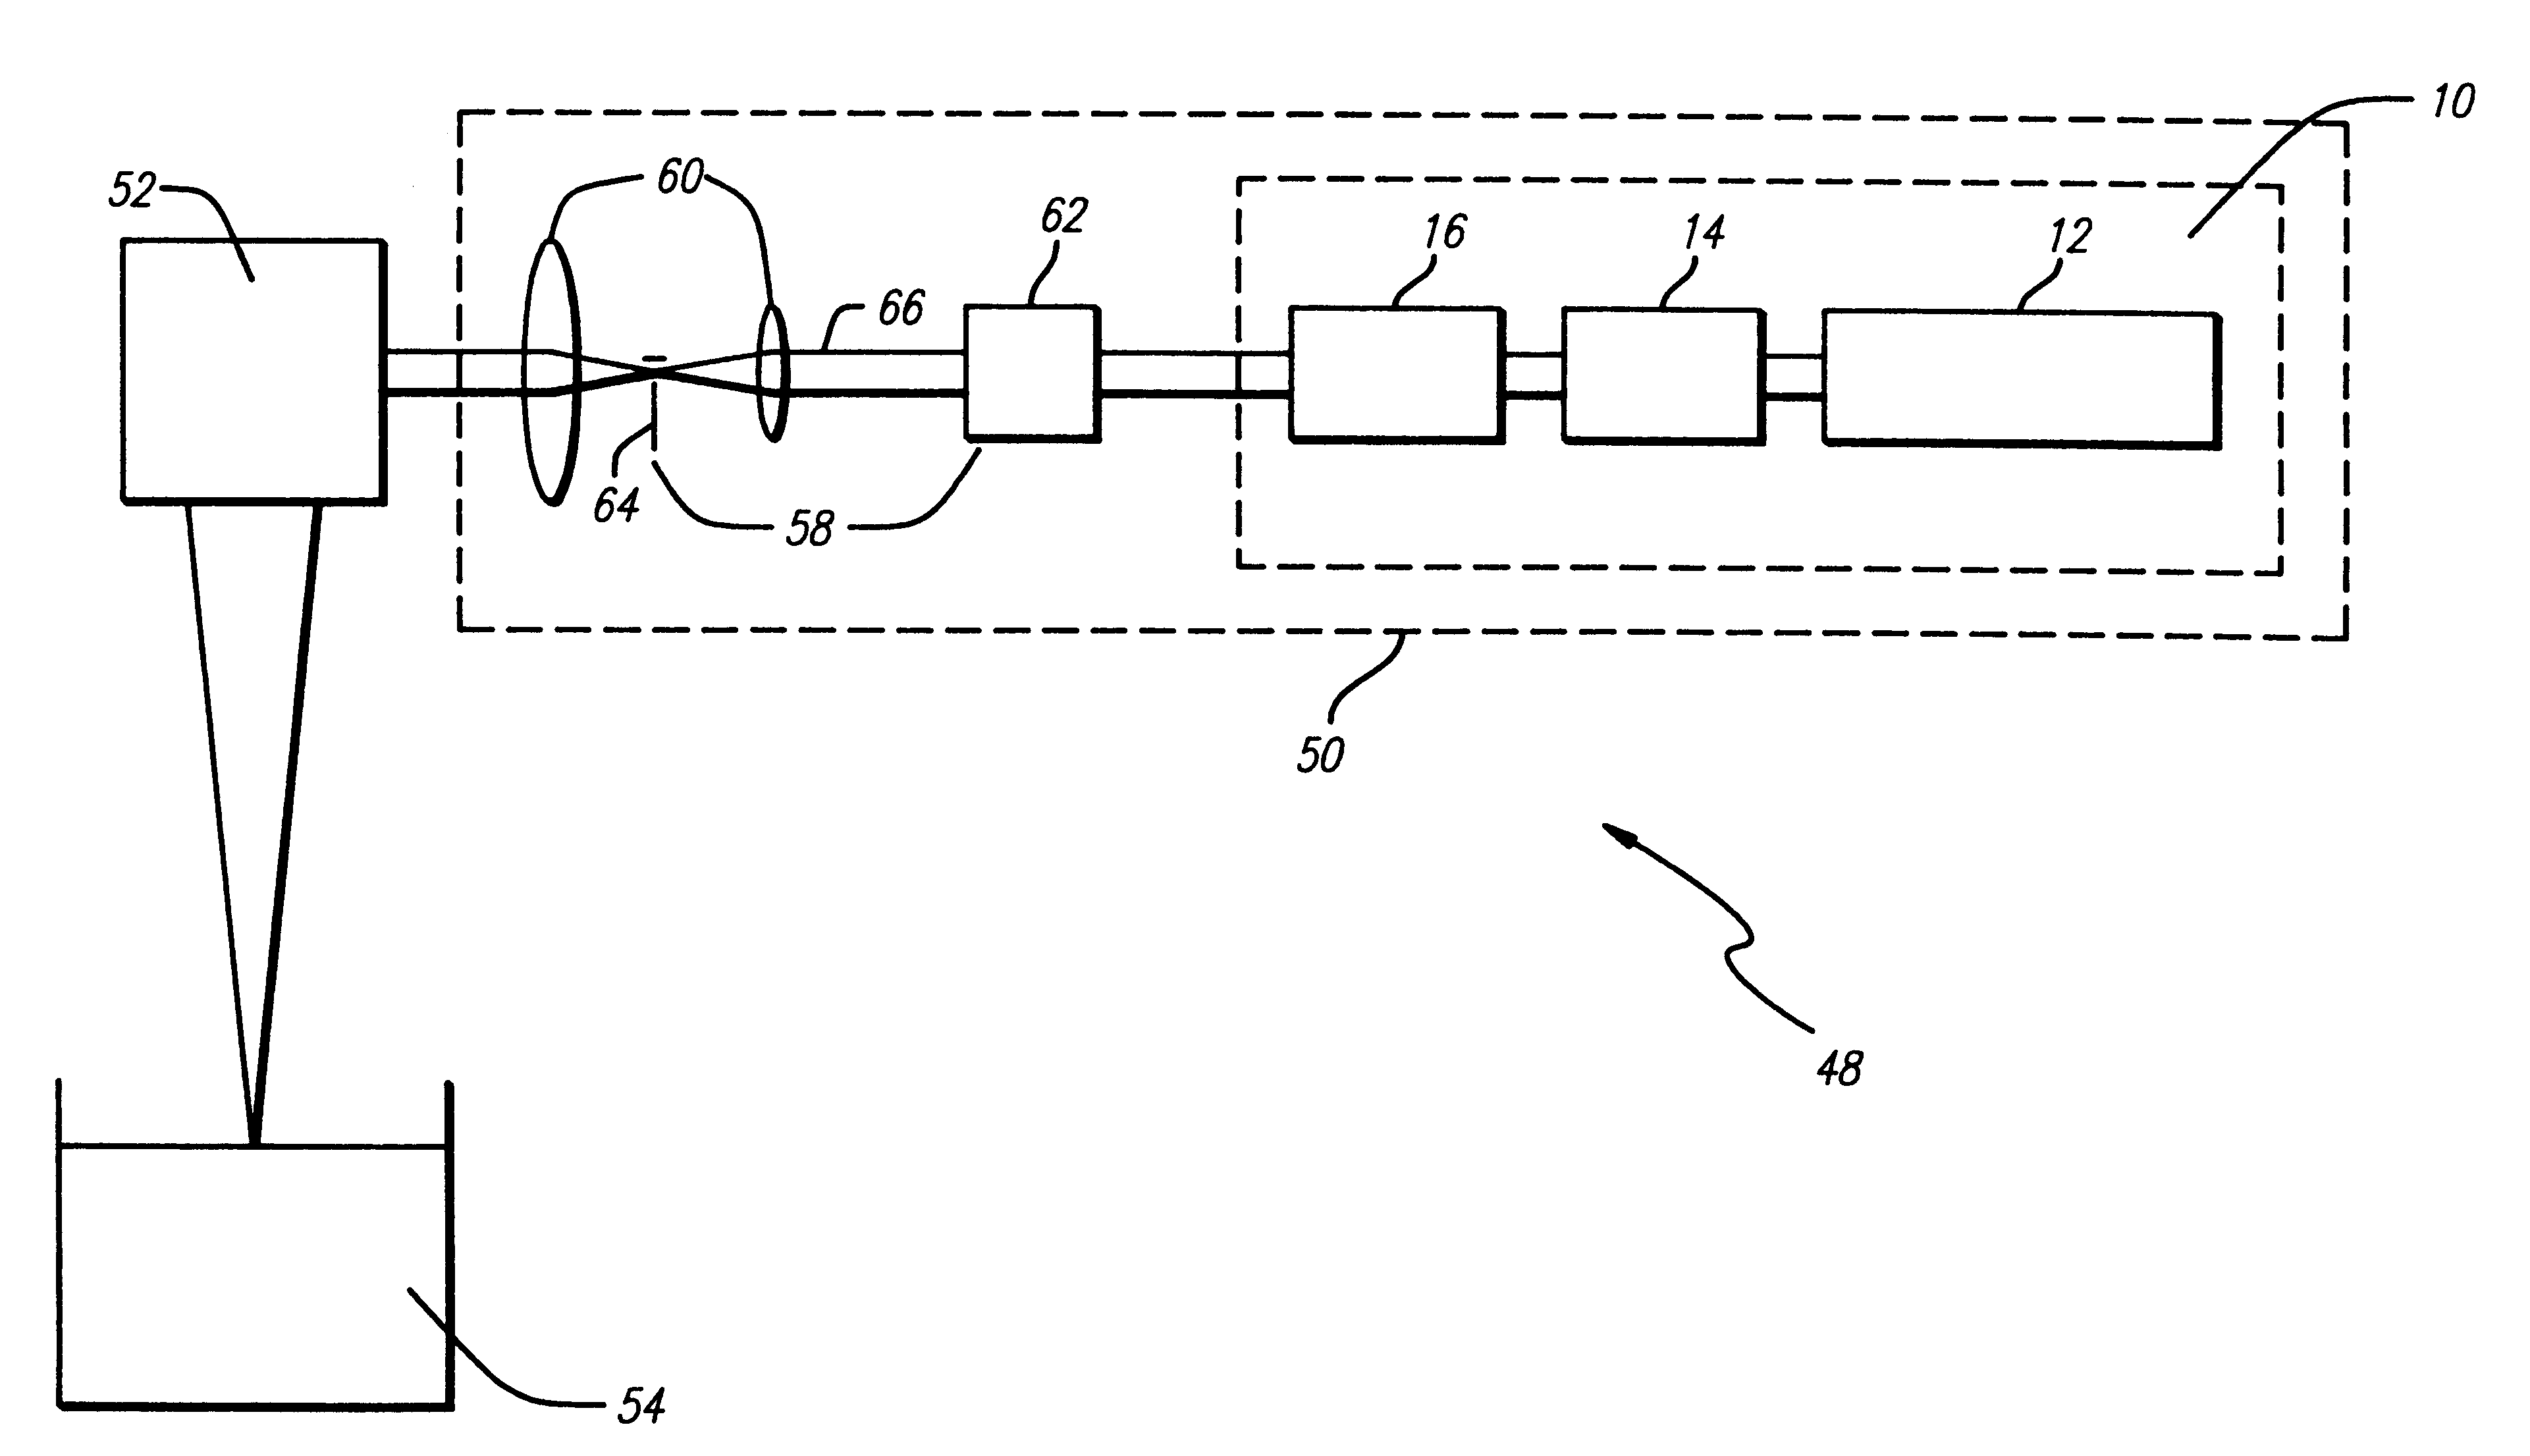 Apparatus and method for forming three-dimensional objects in stereolithography utilizing a laser exposure system with a diode pumped frequency-multiplied solid state laser